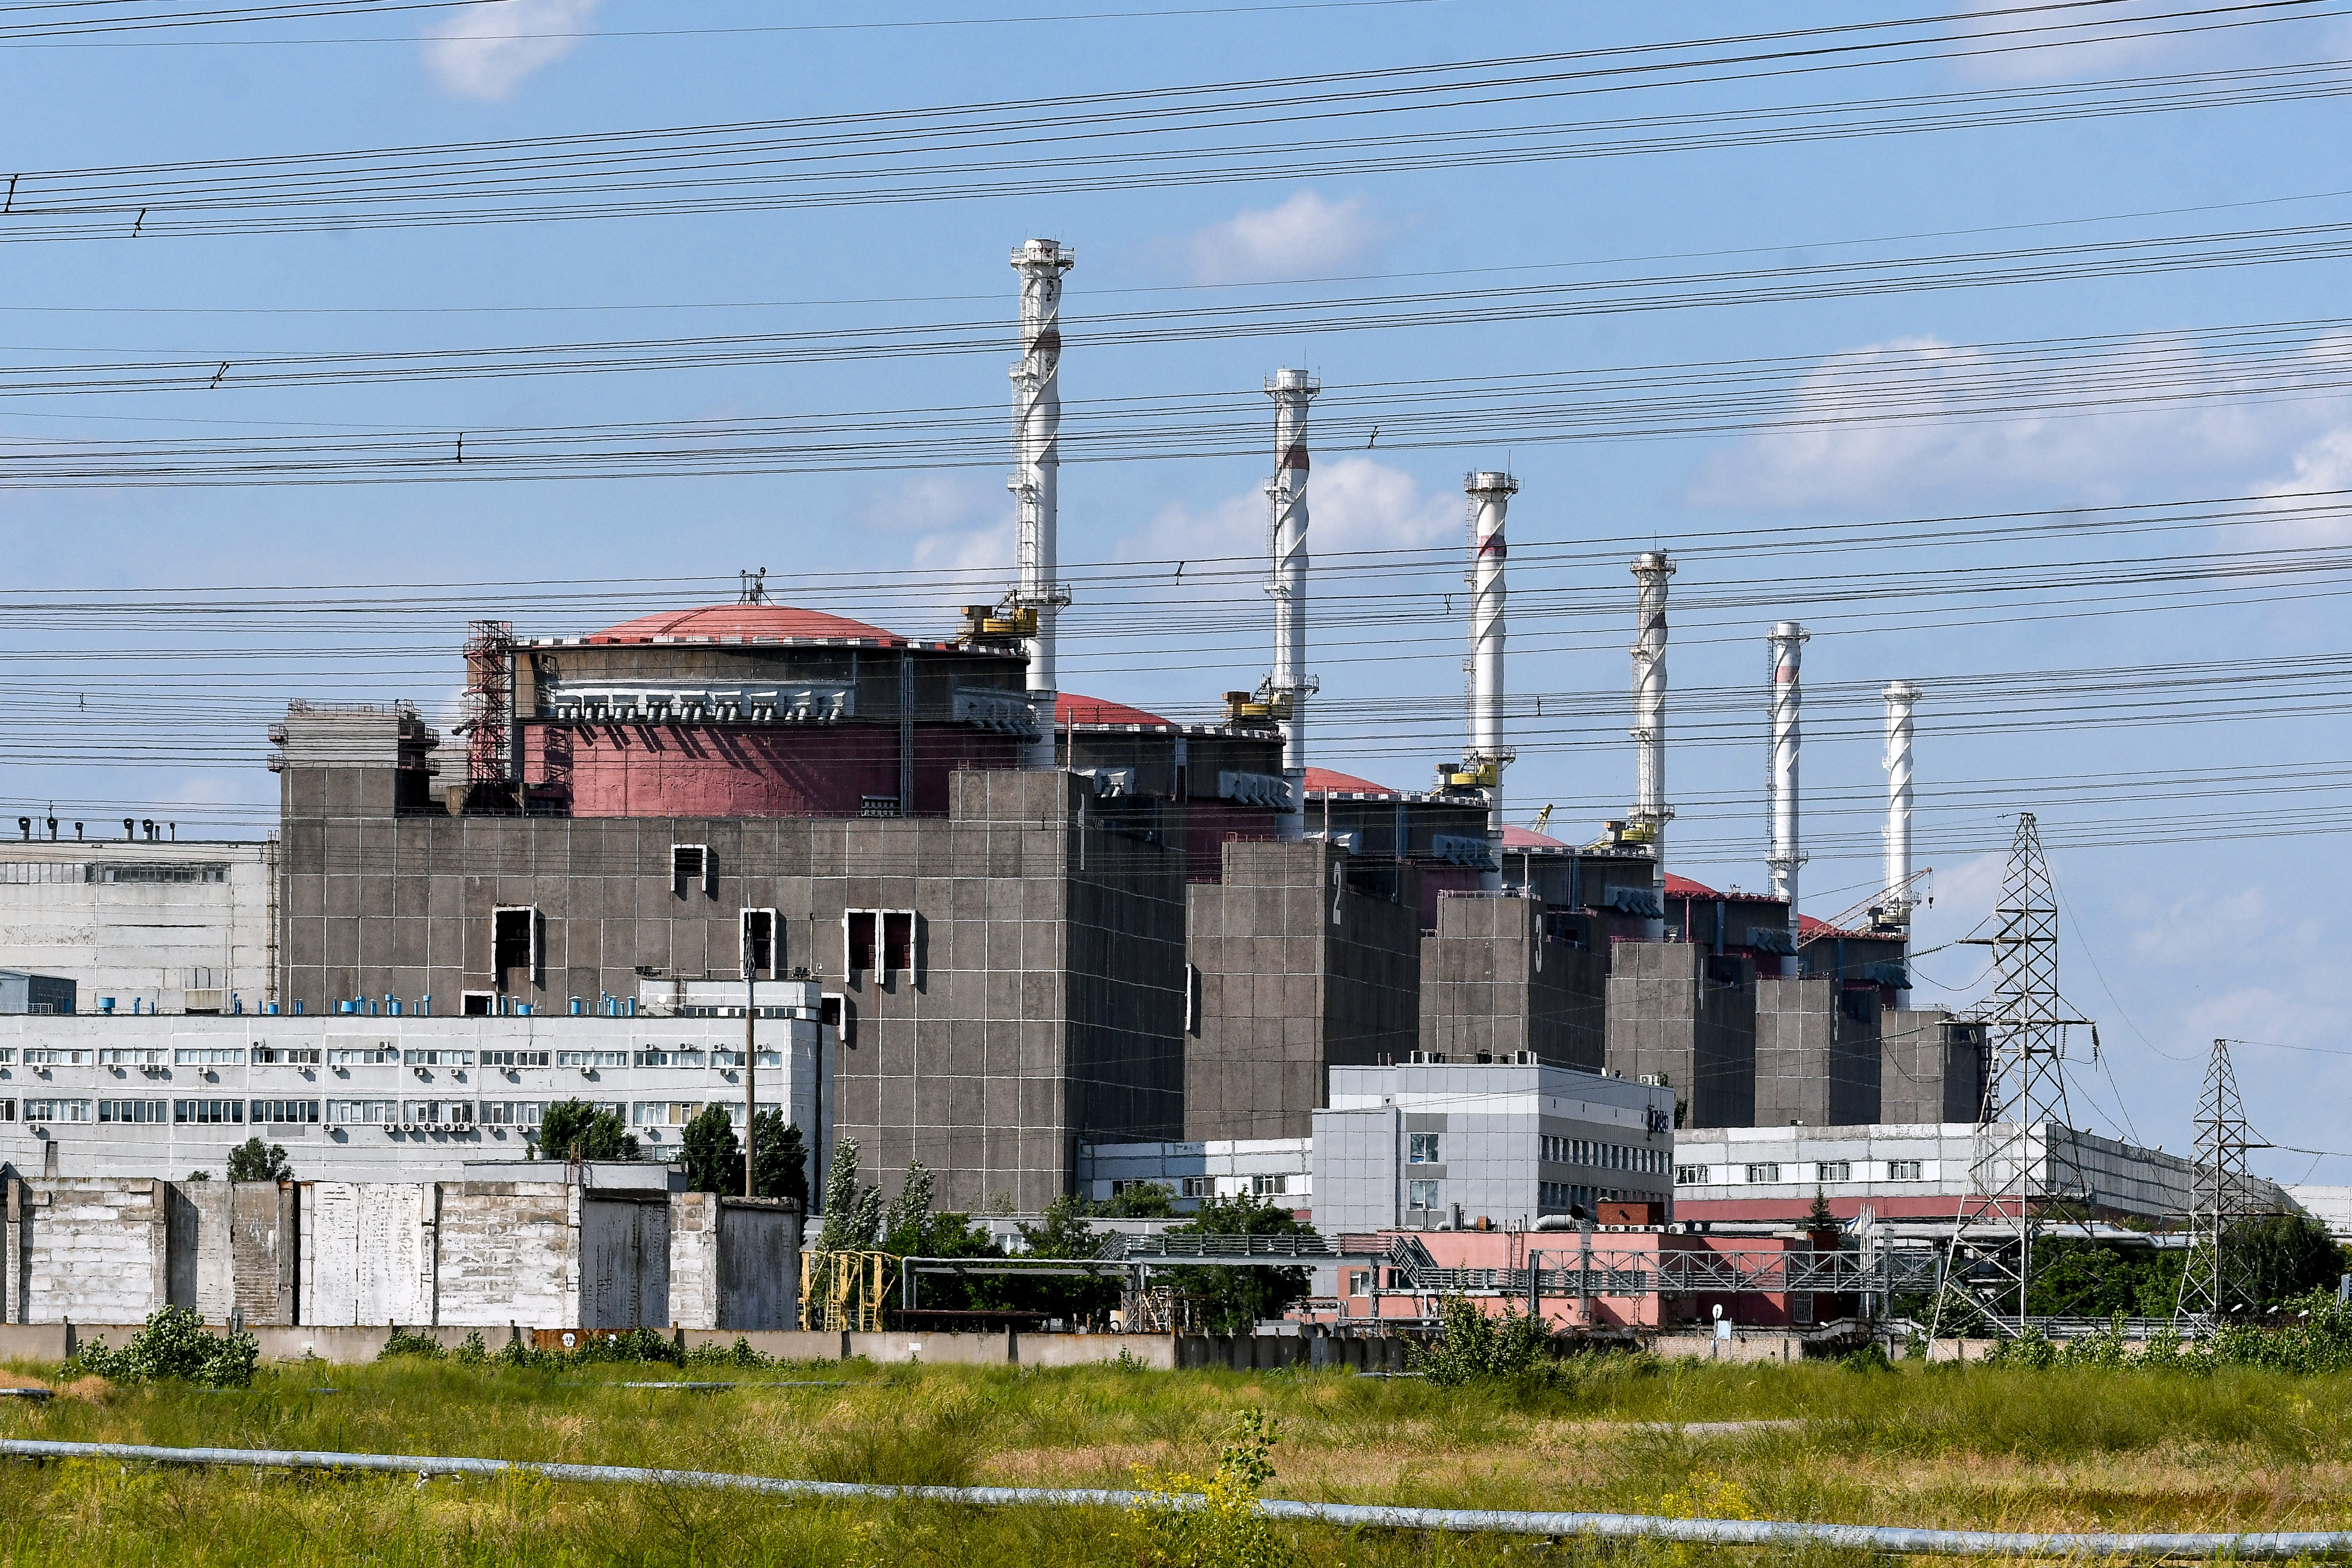 ix power units generate 40-42 billion kWh of electricity making the Zaporizhzhia Nuclear Power Plant the largest nuclear power plant not only in Ukraine, but also in Europe, Enerhodar, Zaporizhzhia Region, southeastern Ukraine, July 9, 2019. Ukrinform.  (Photo credit should read Dmytro Smolyenko/Future Publishing via Getty Images)